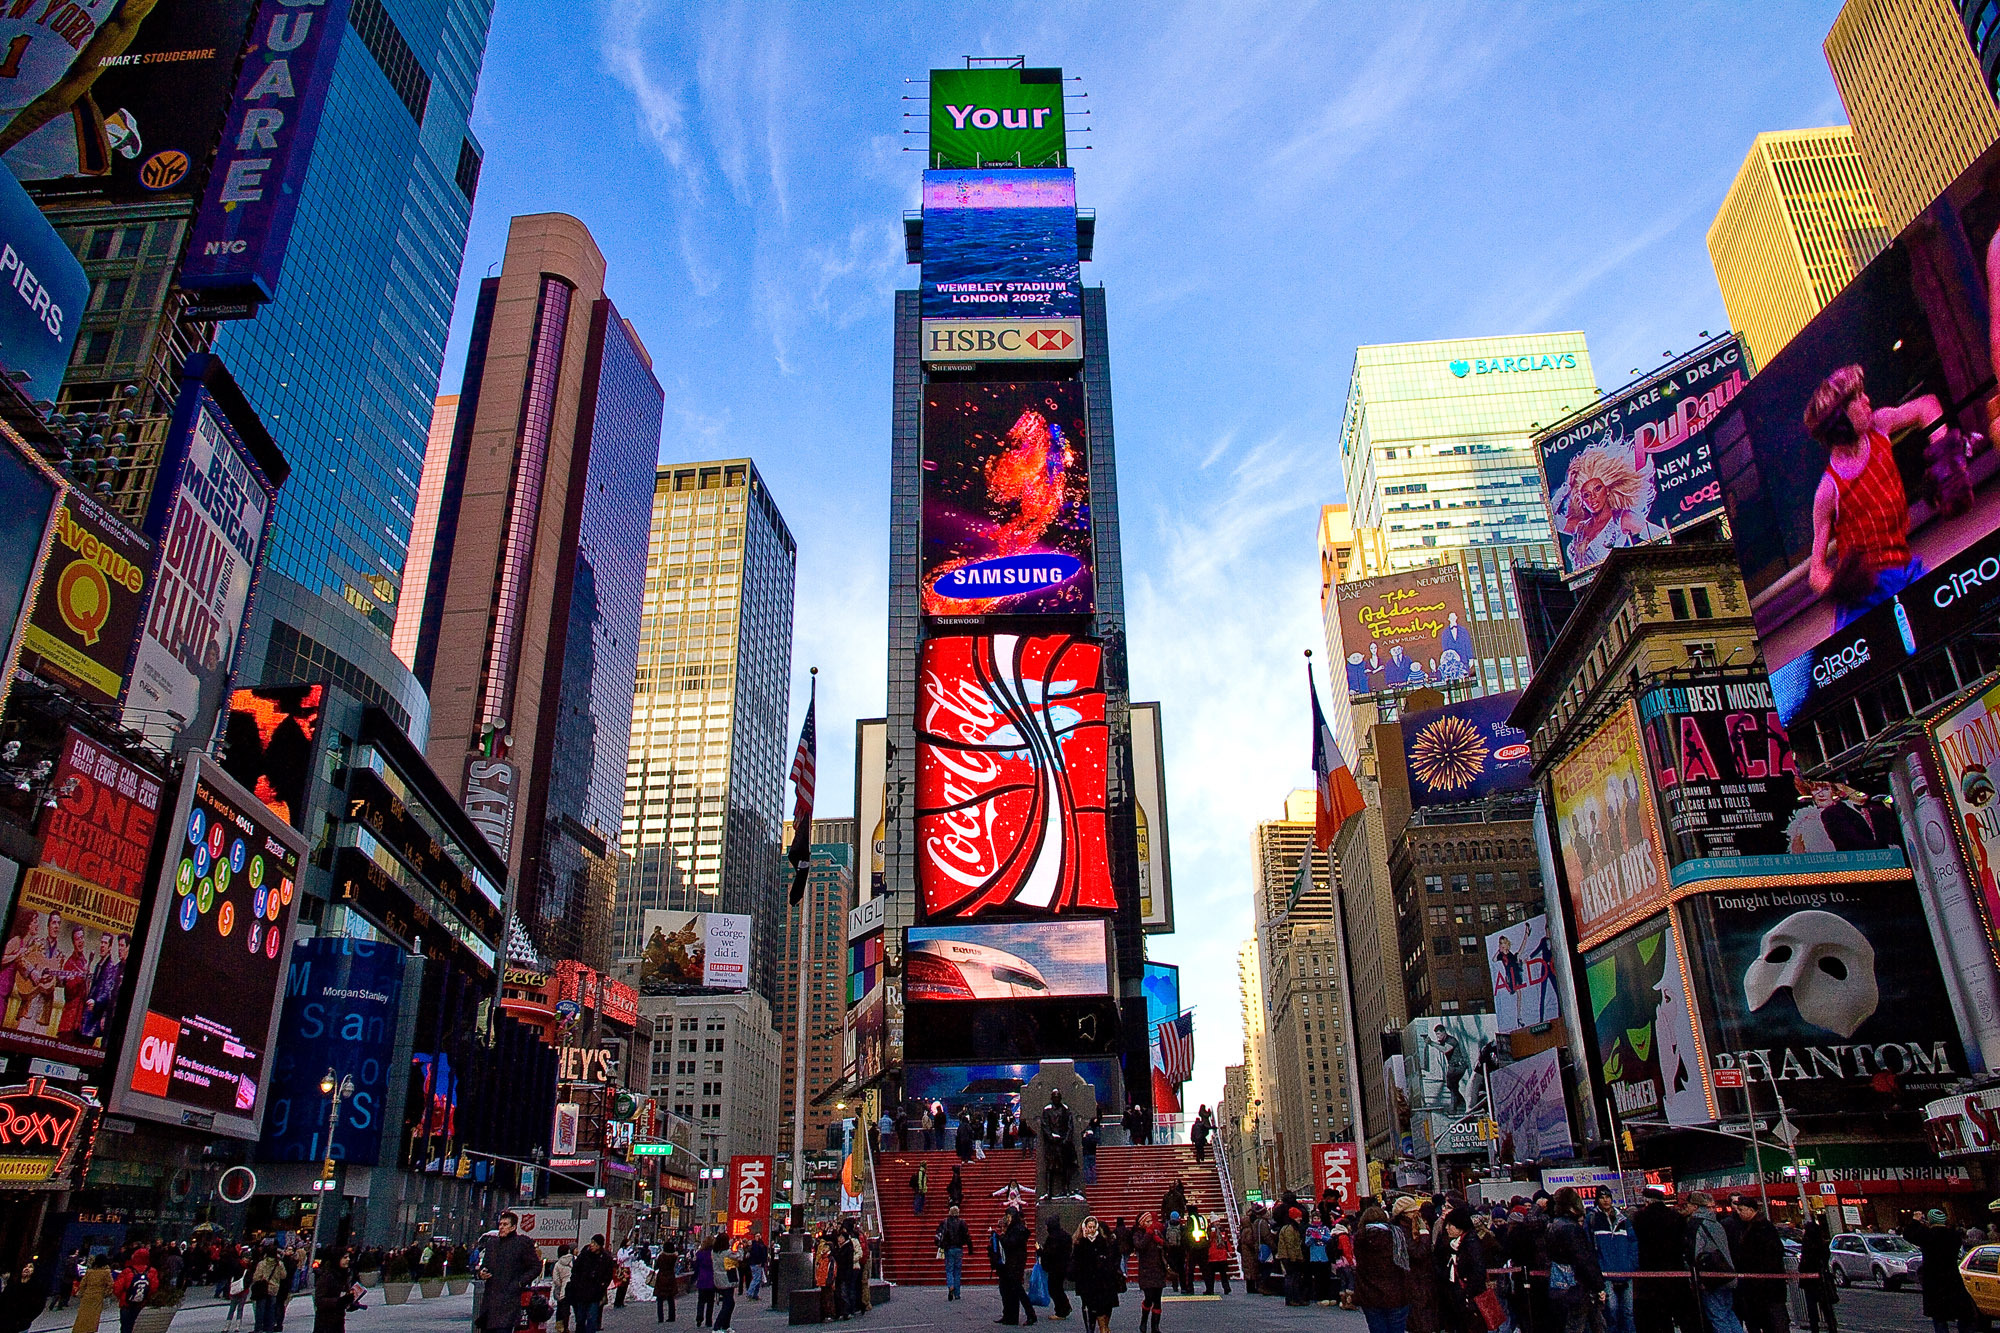 Go Behind-the-Scenes at Times Square with the Times Square 